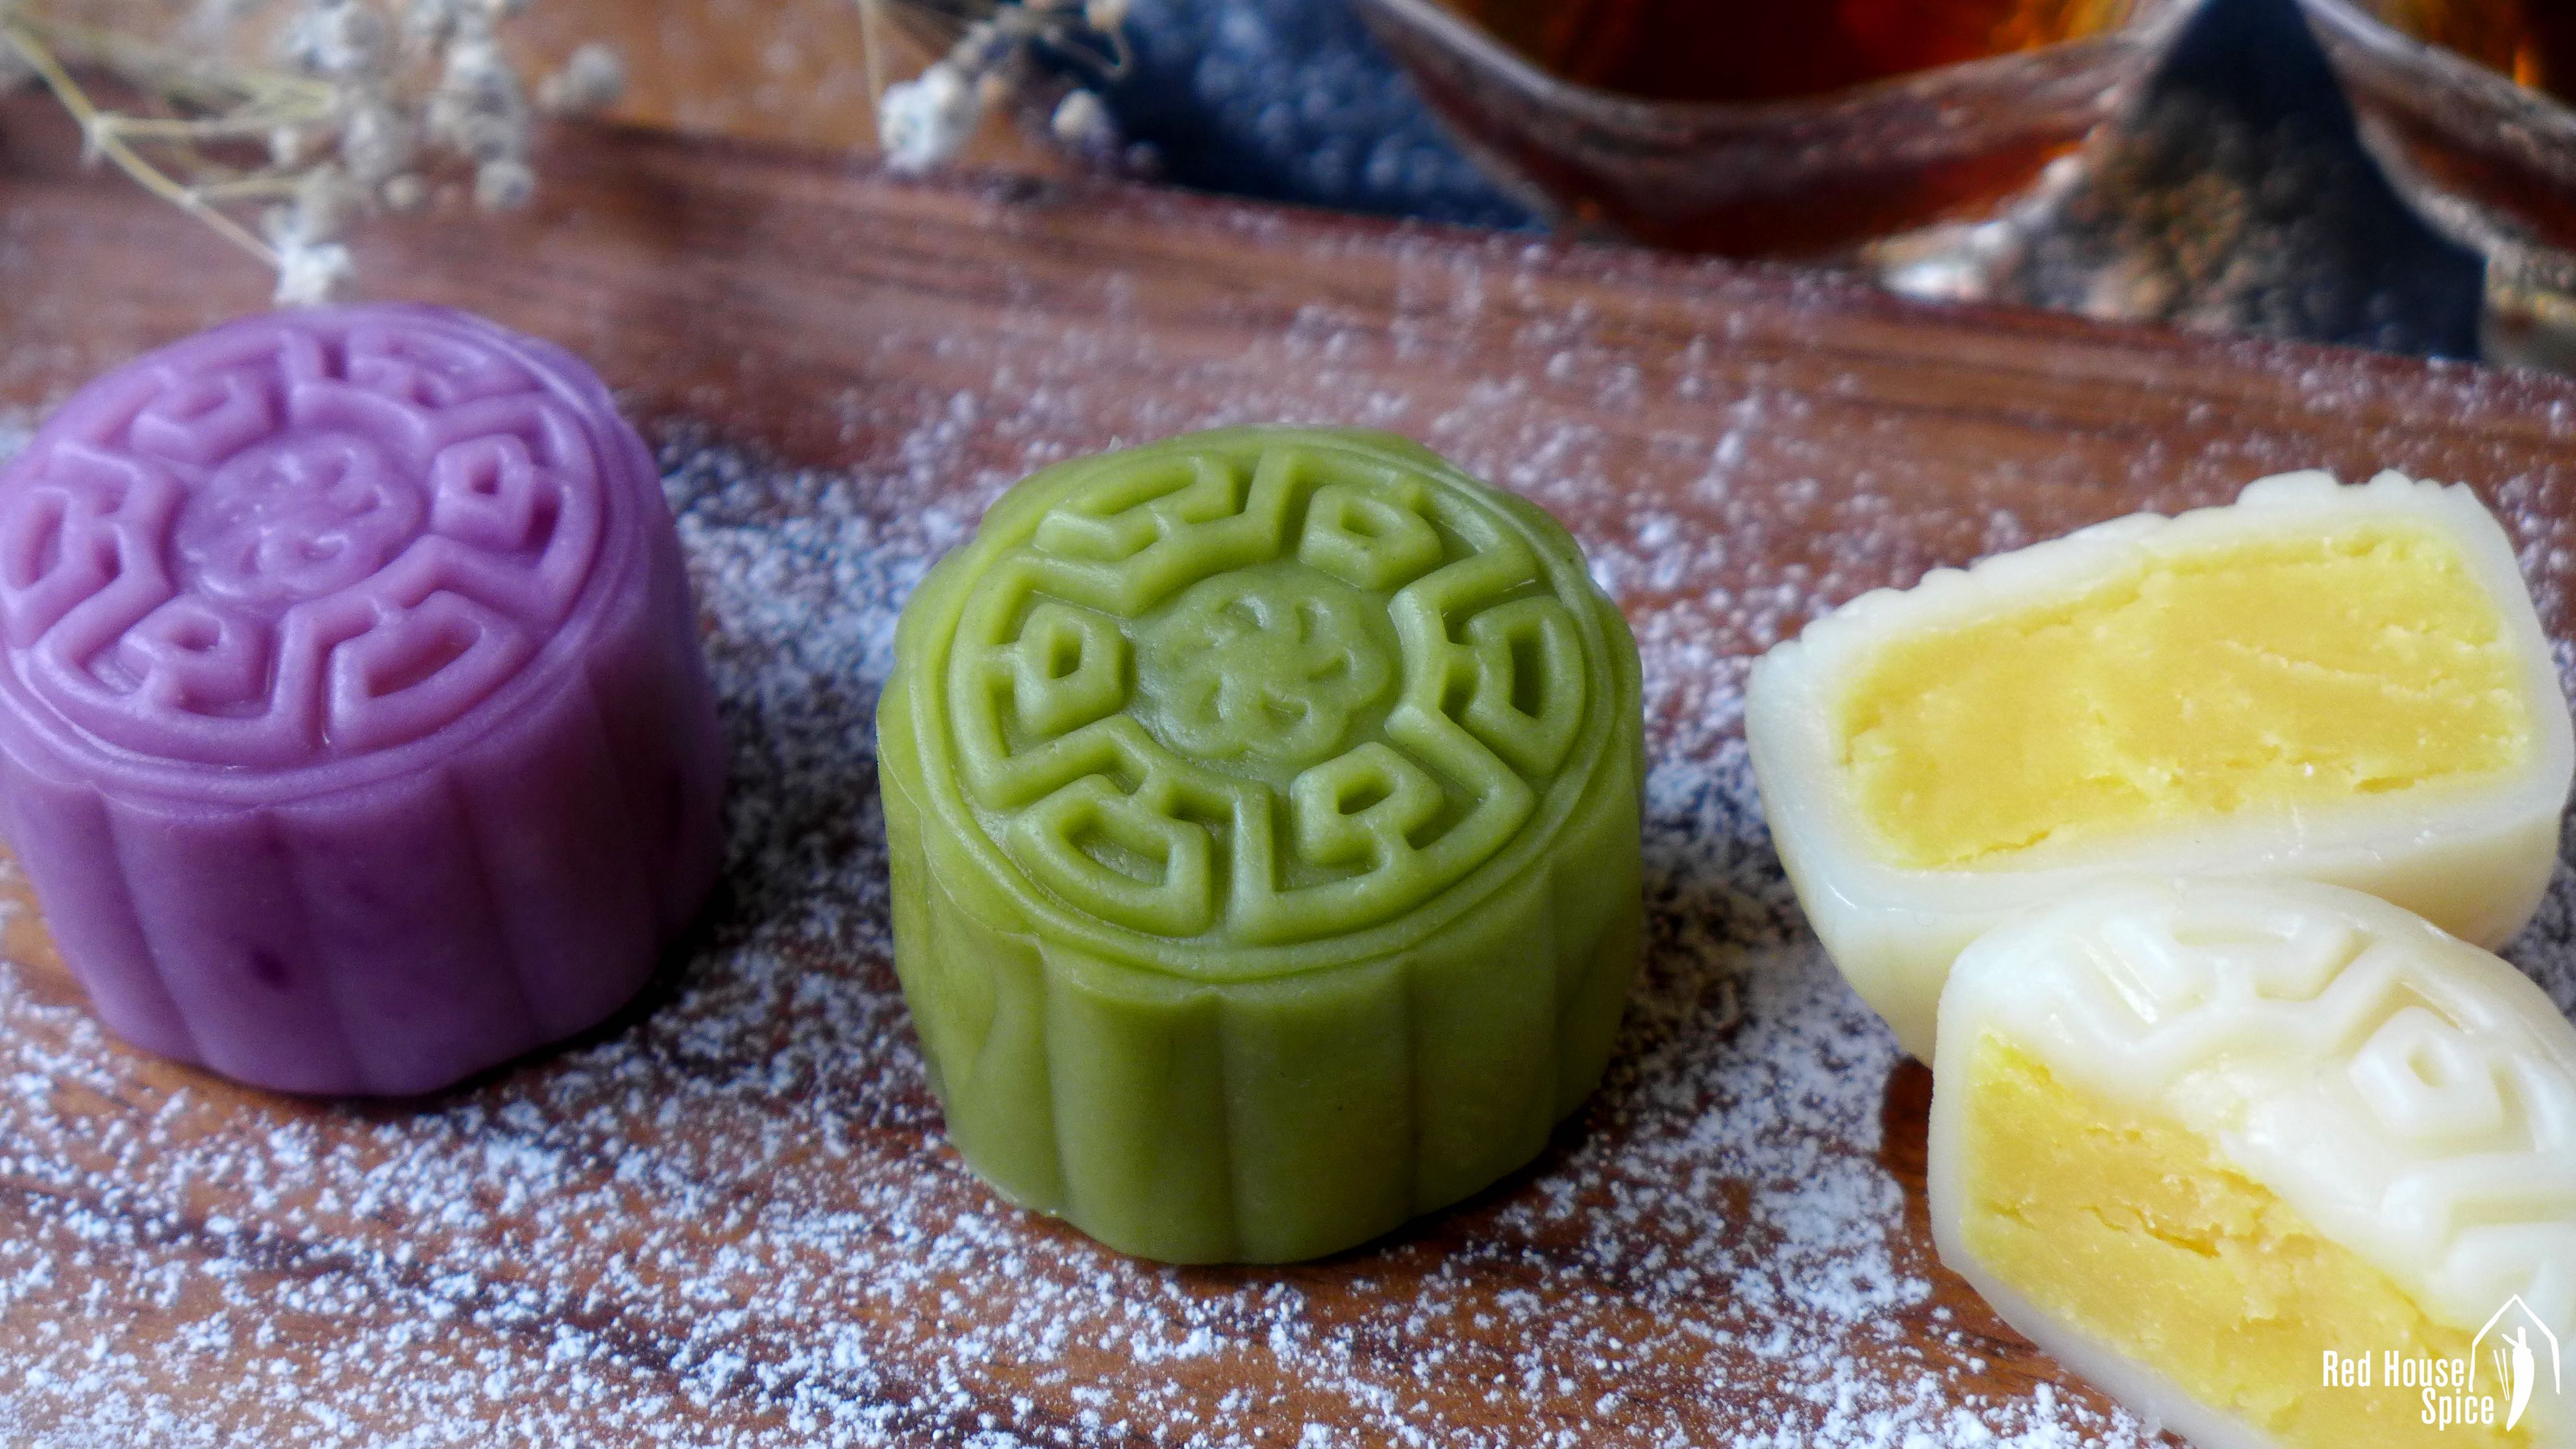 Snow skin mooncake with custard filling (冰皮月饼) – Red House Spice